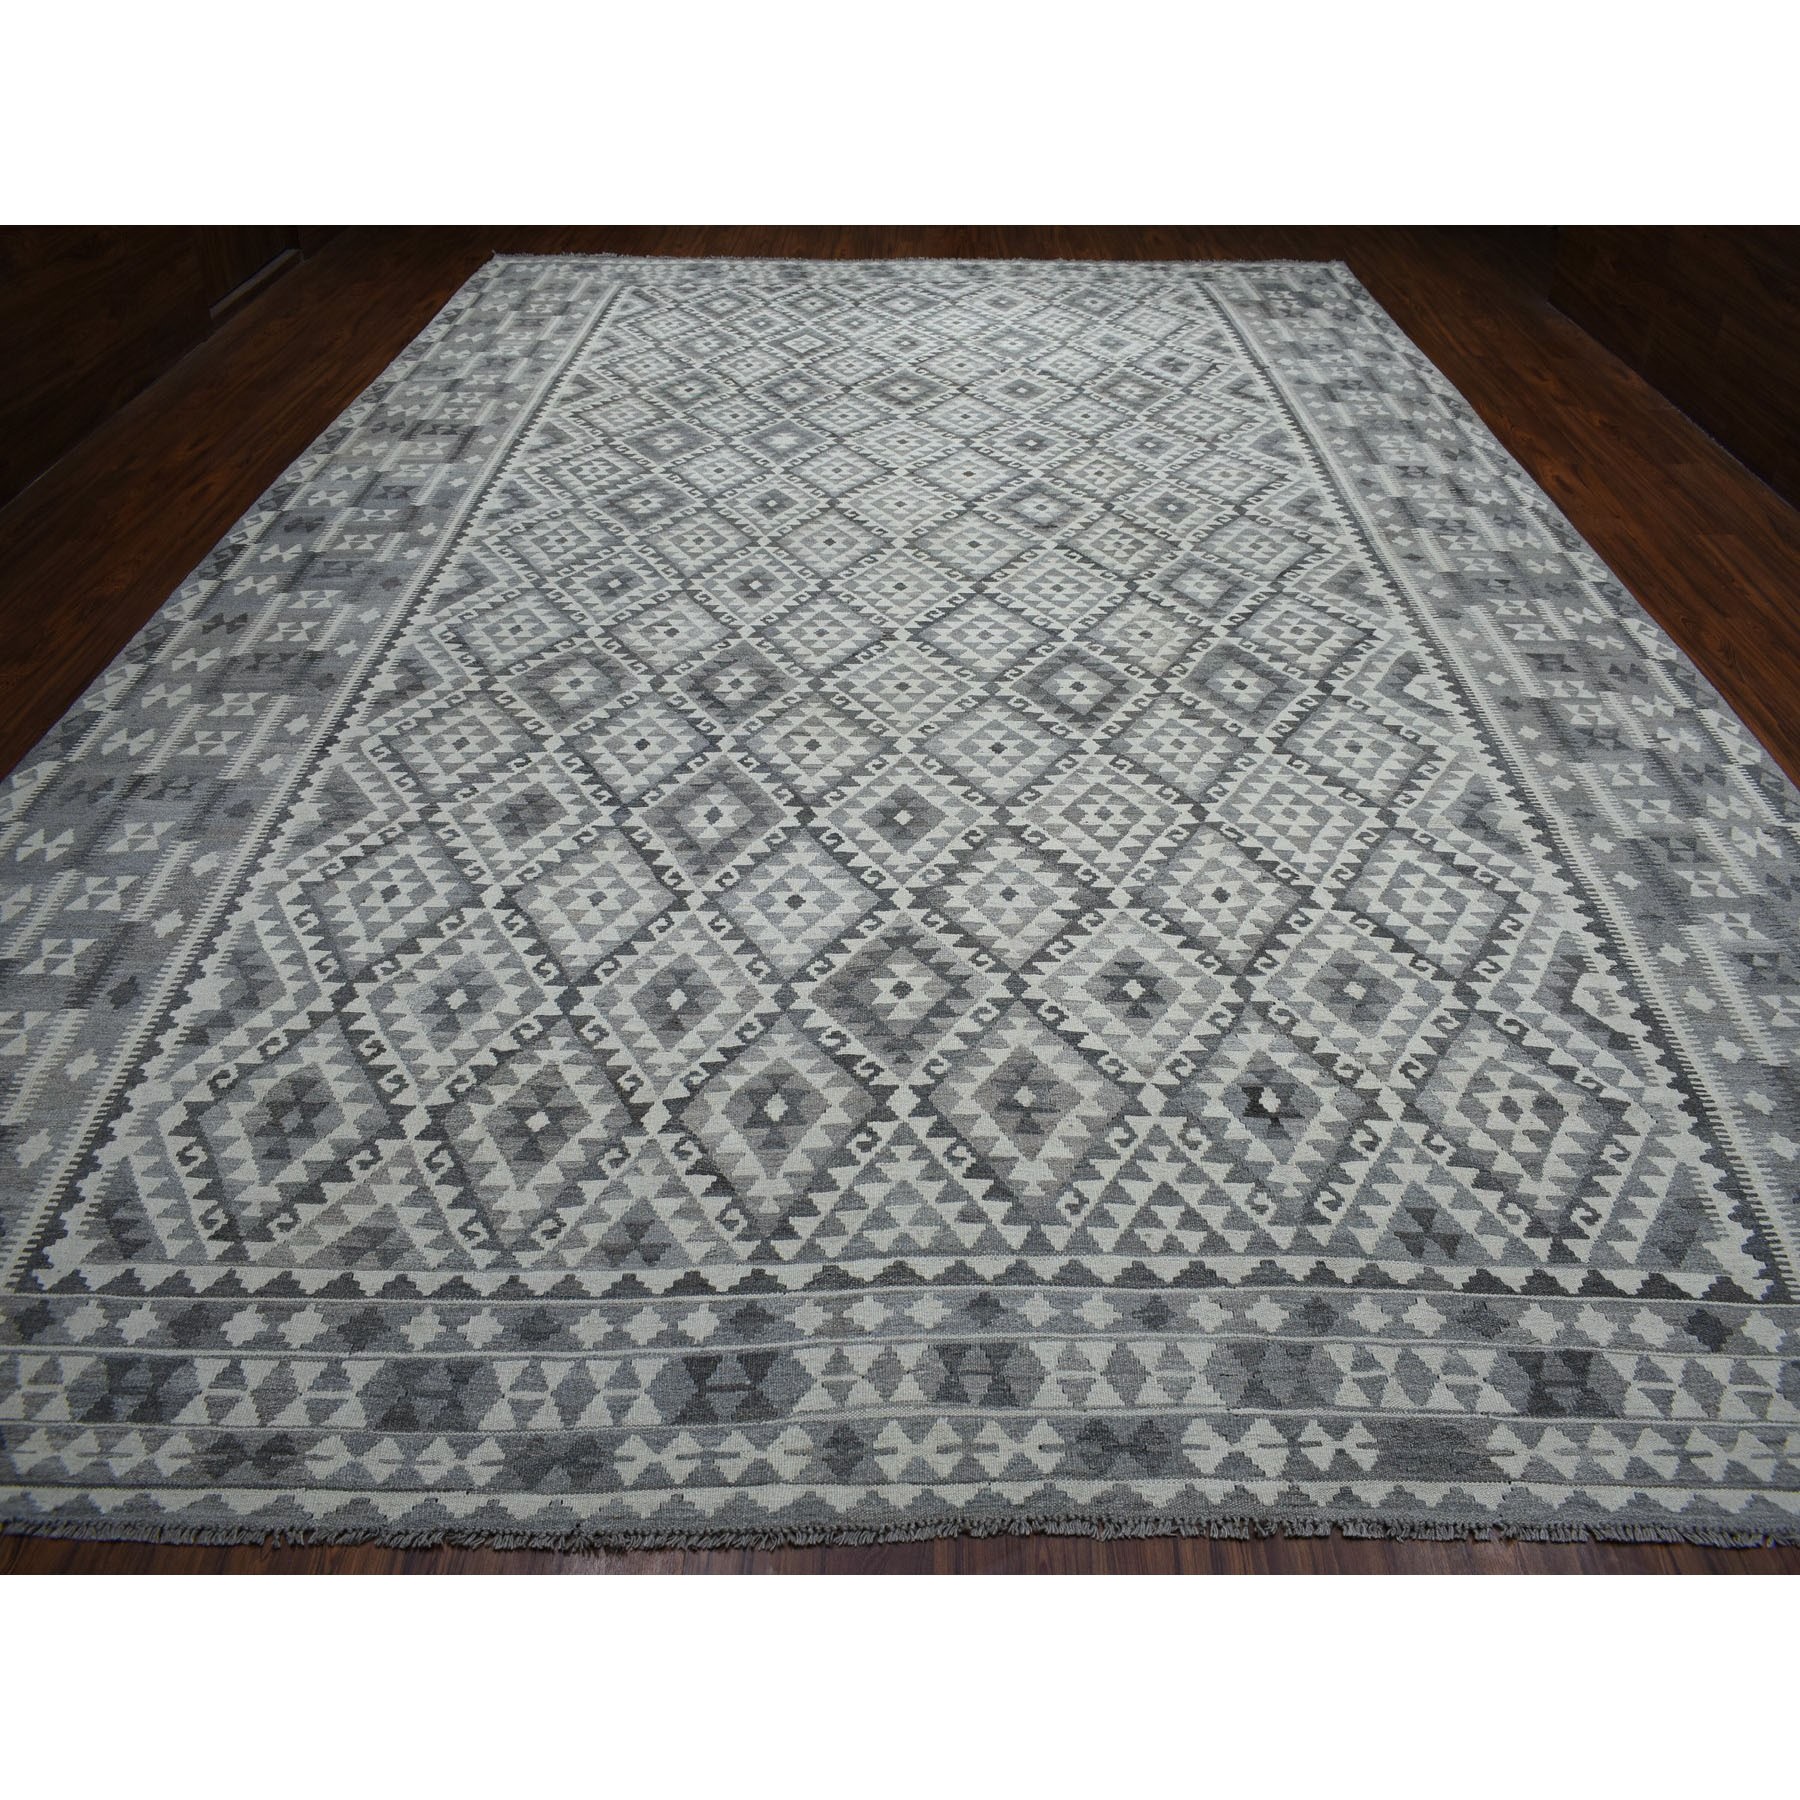 11-7 x16-4  Oversized Undyed Natural Wool Afghan Kilim Reversible Hand Woven Reversible Rug 